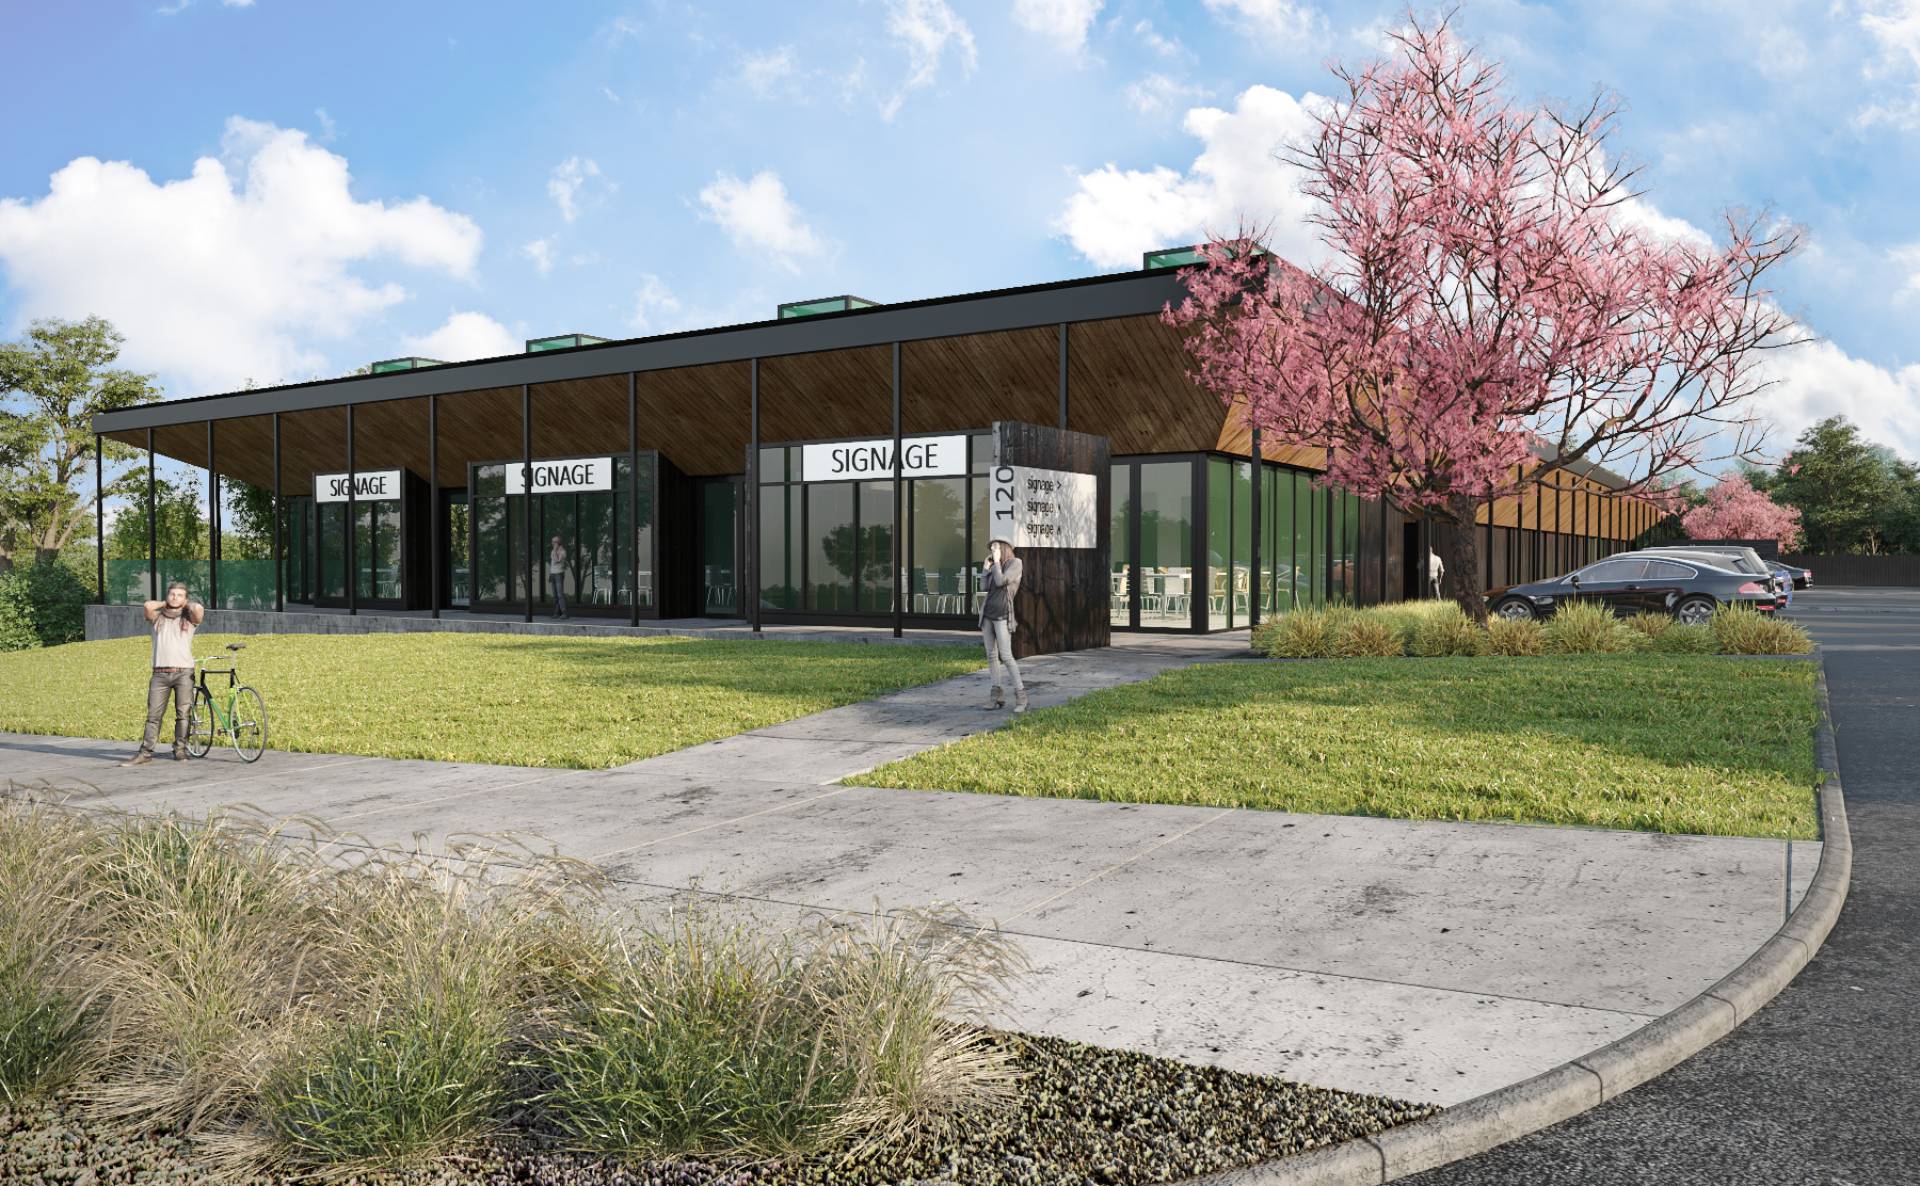 Westgate Childcare by Herbst Maxcey Metropolitan Architects